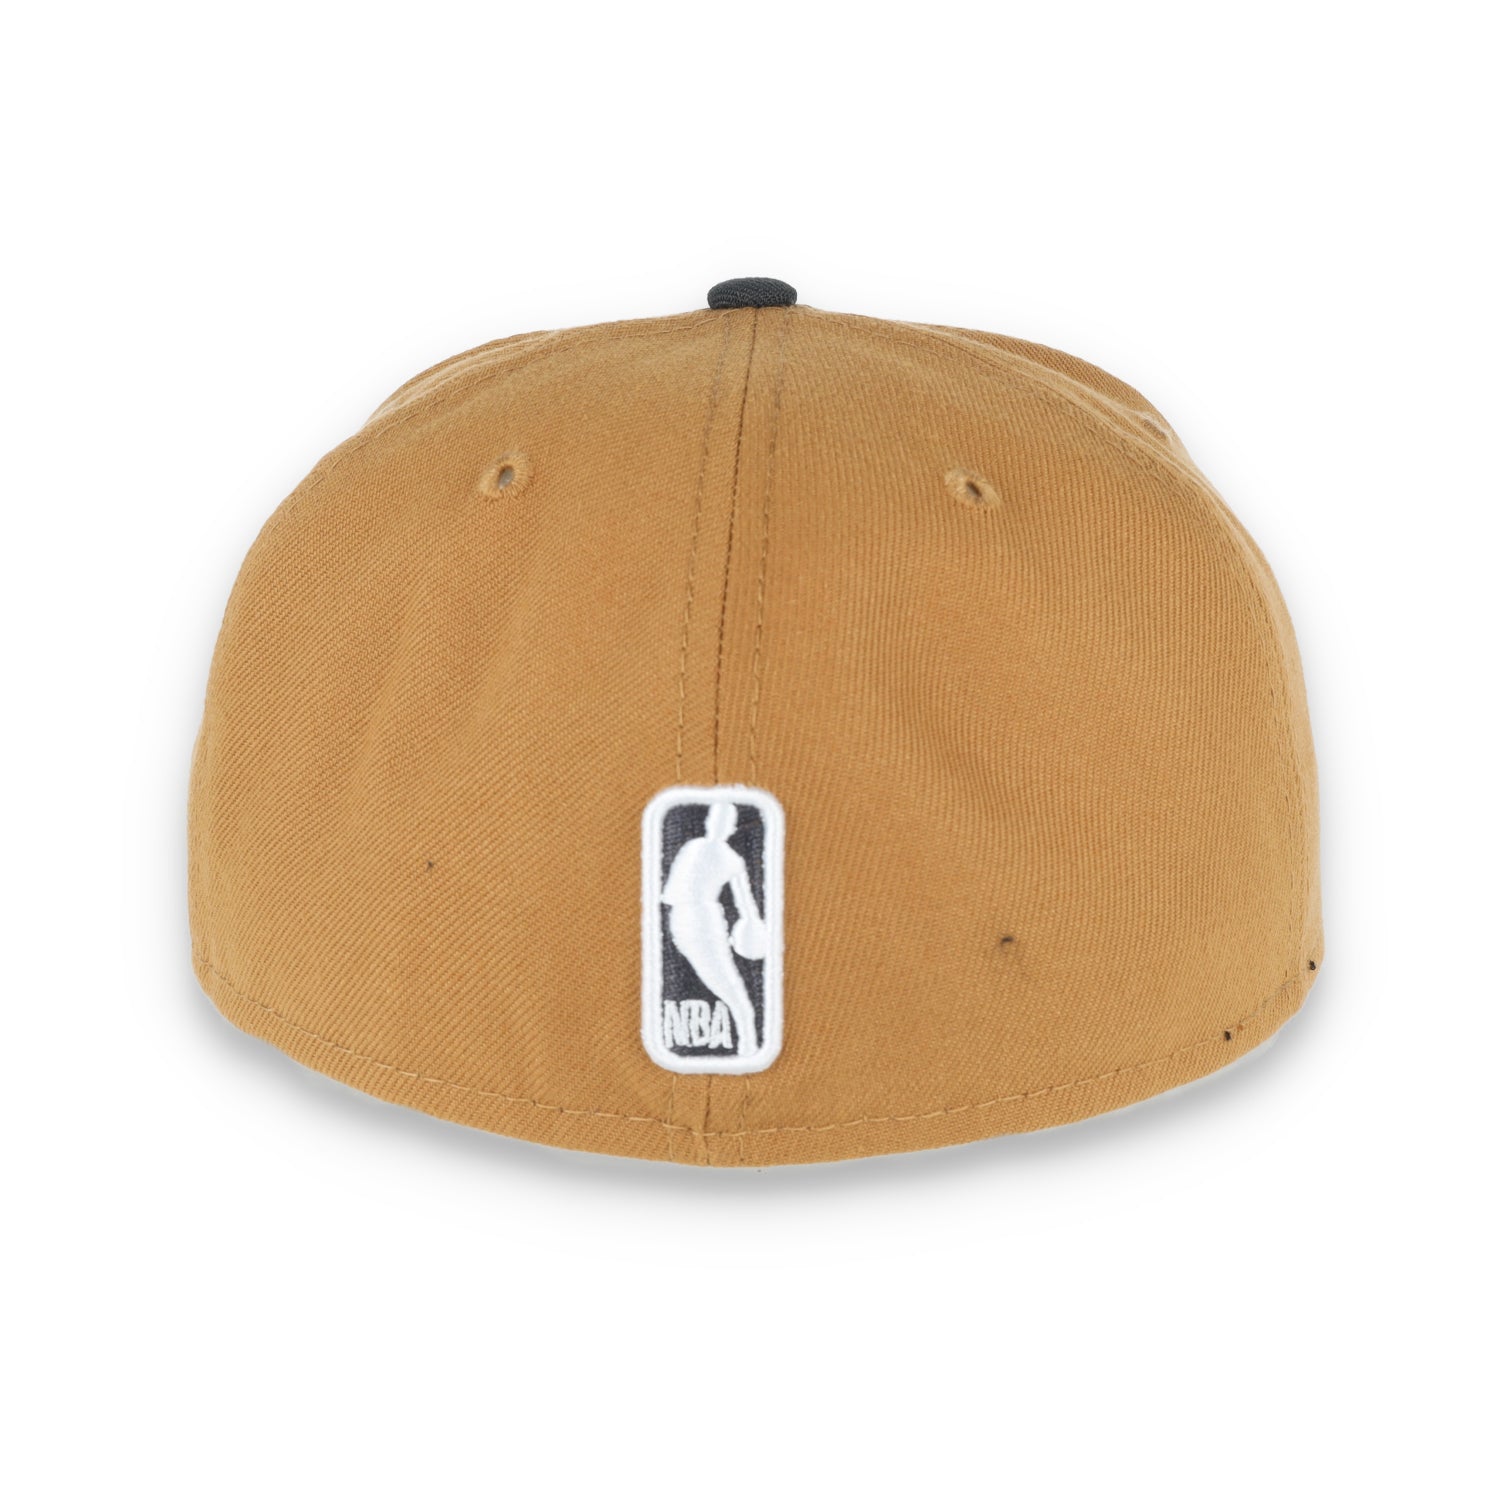 NEW ERA GOLDEN STATE WARRIORS COLOR PACK 2TONE 59FIFTY FITTED HAT- TAN/GREY